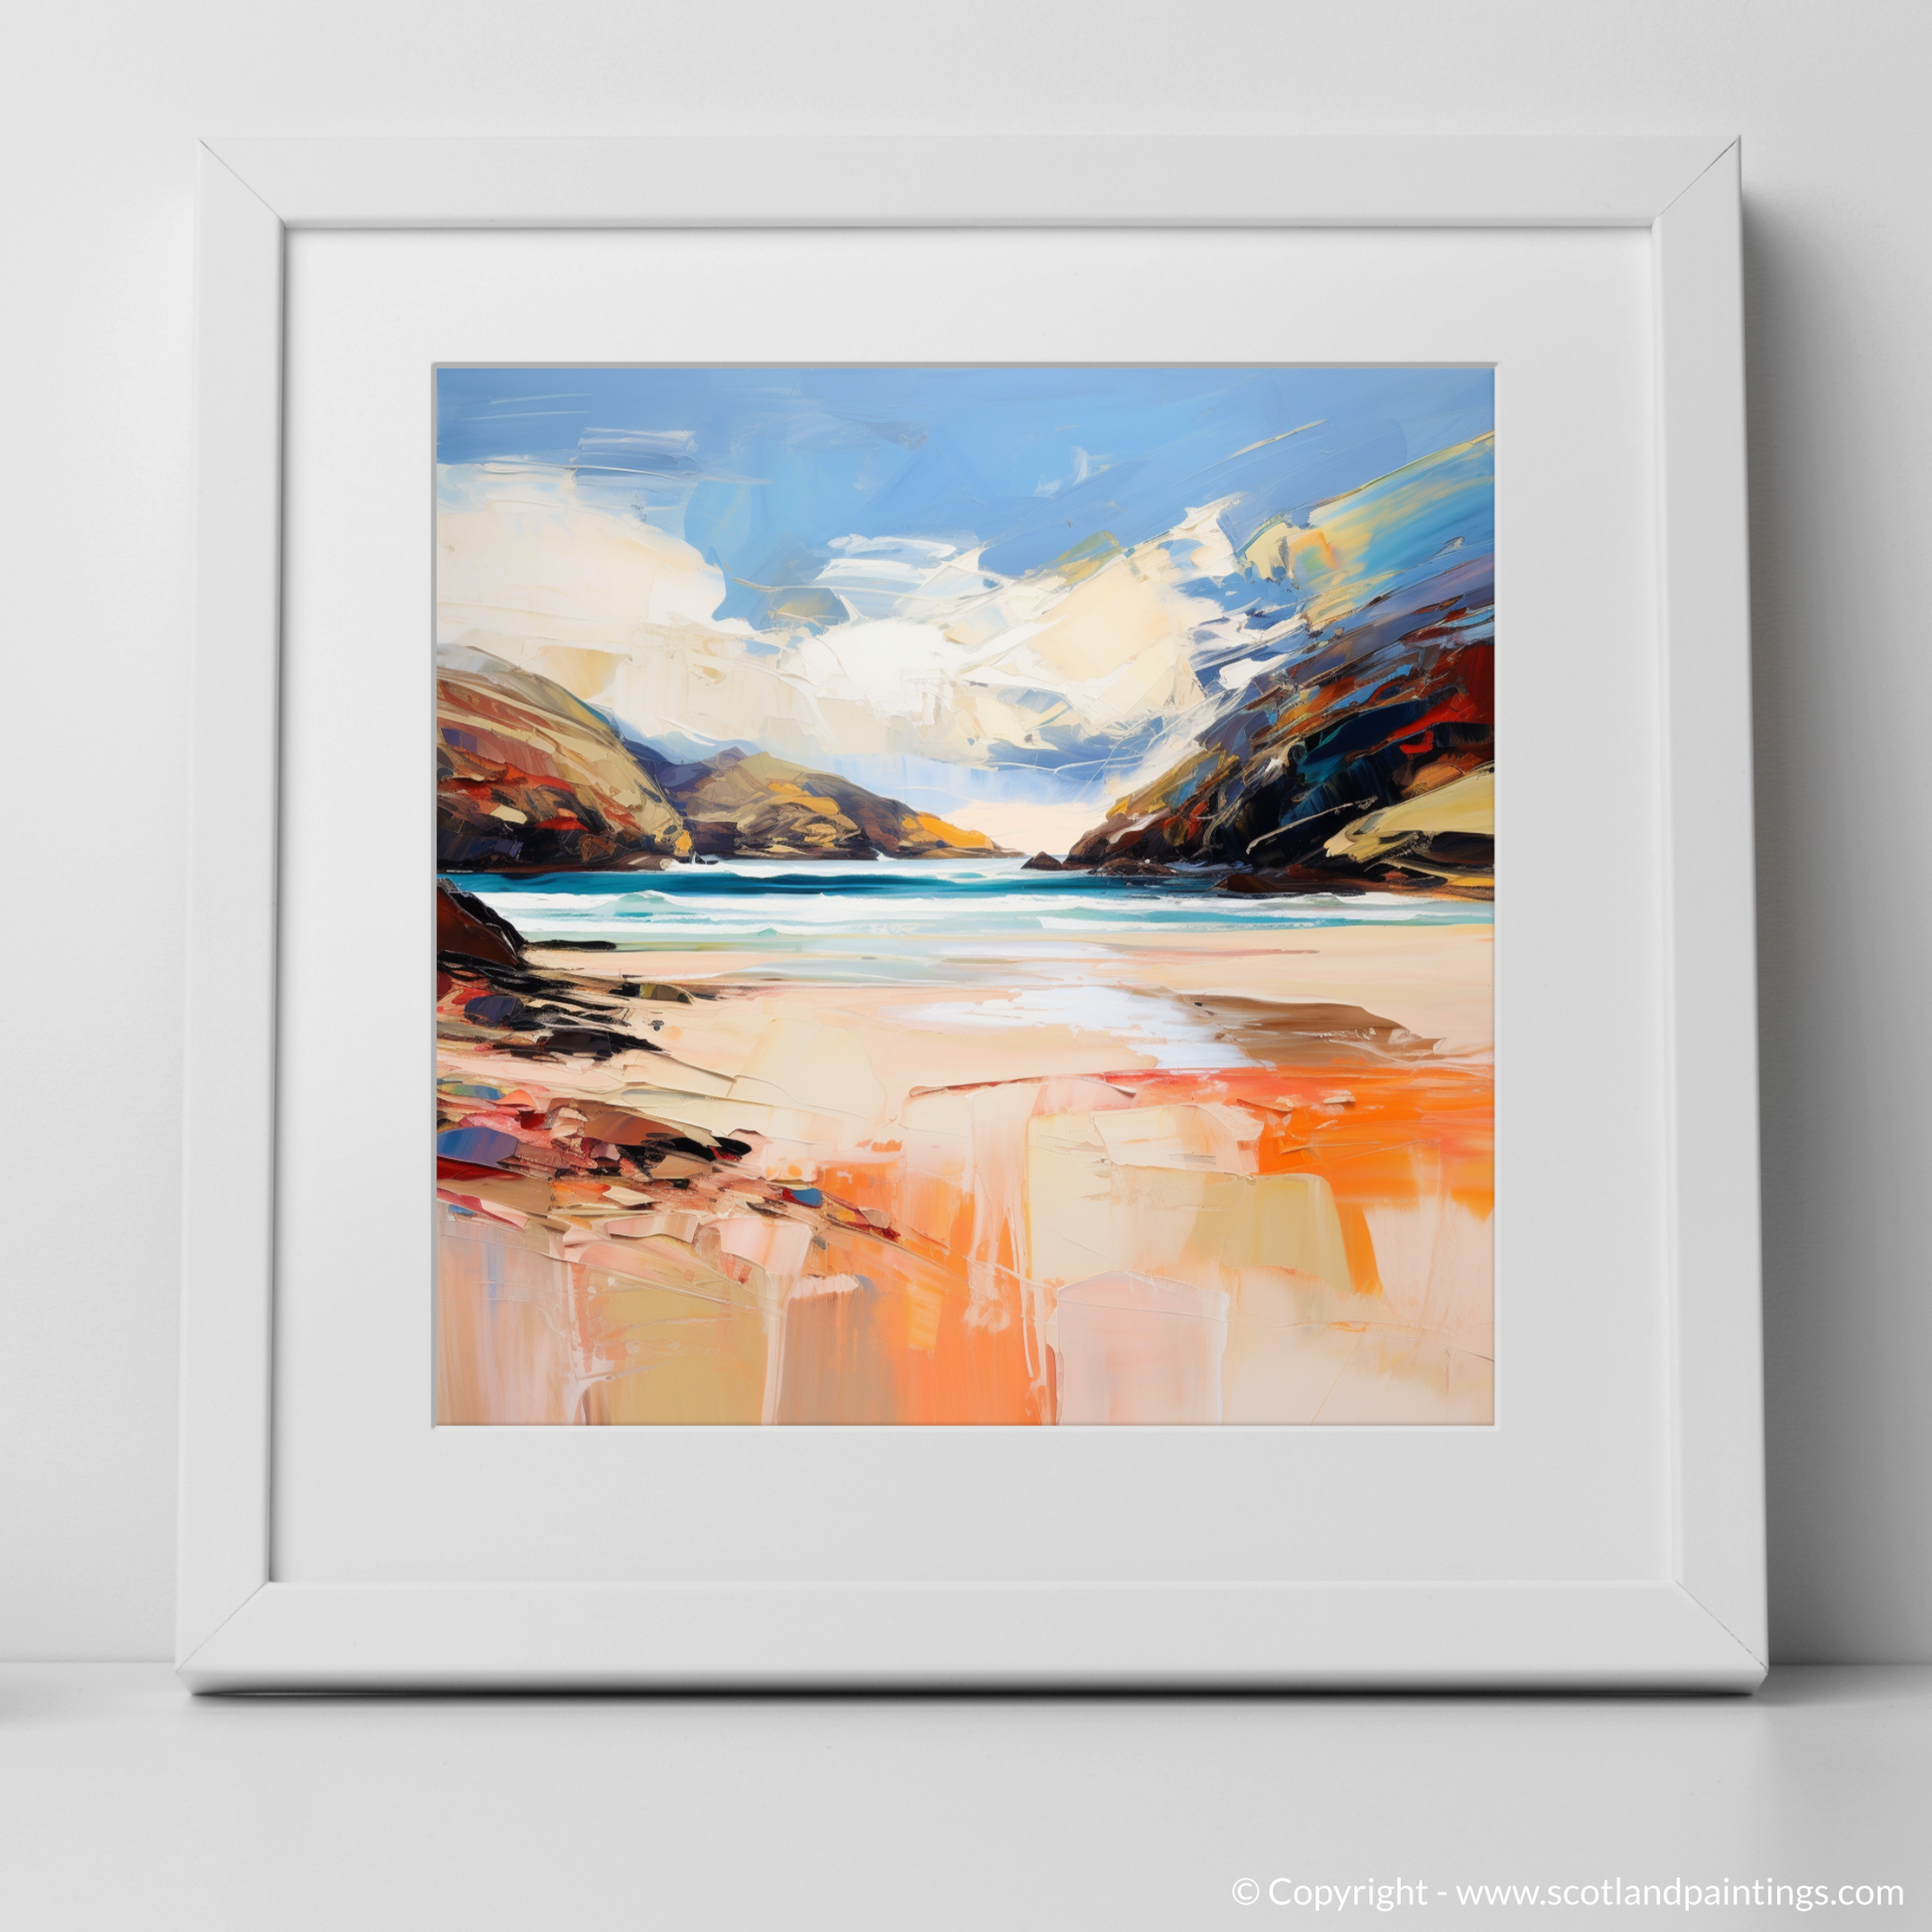 Art Print of Sandwood Bay, Sutherland with a white frame